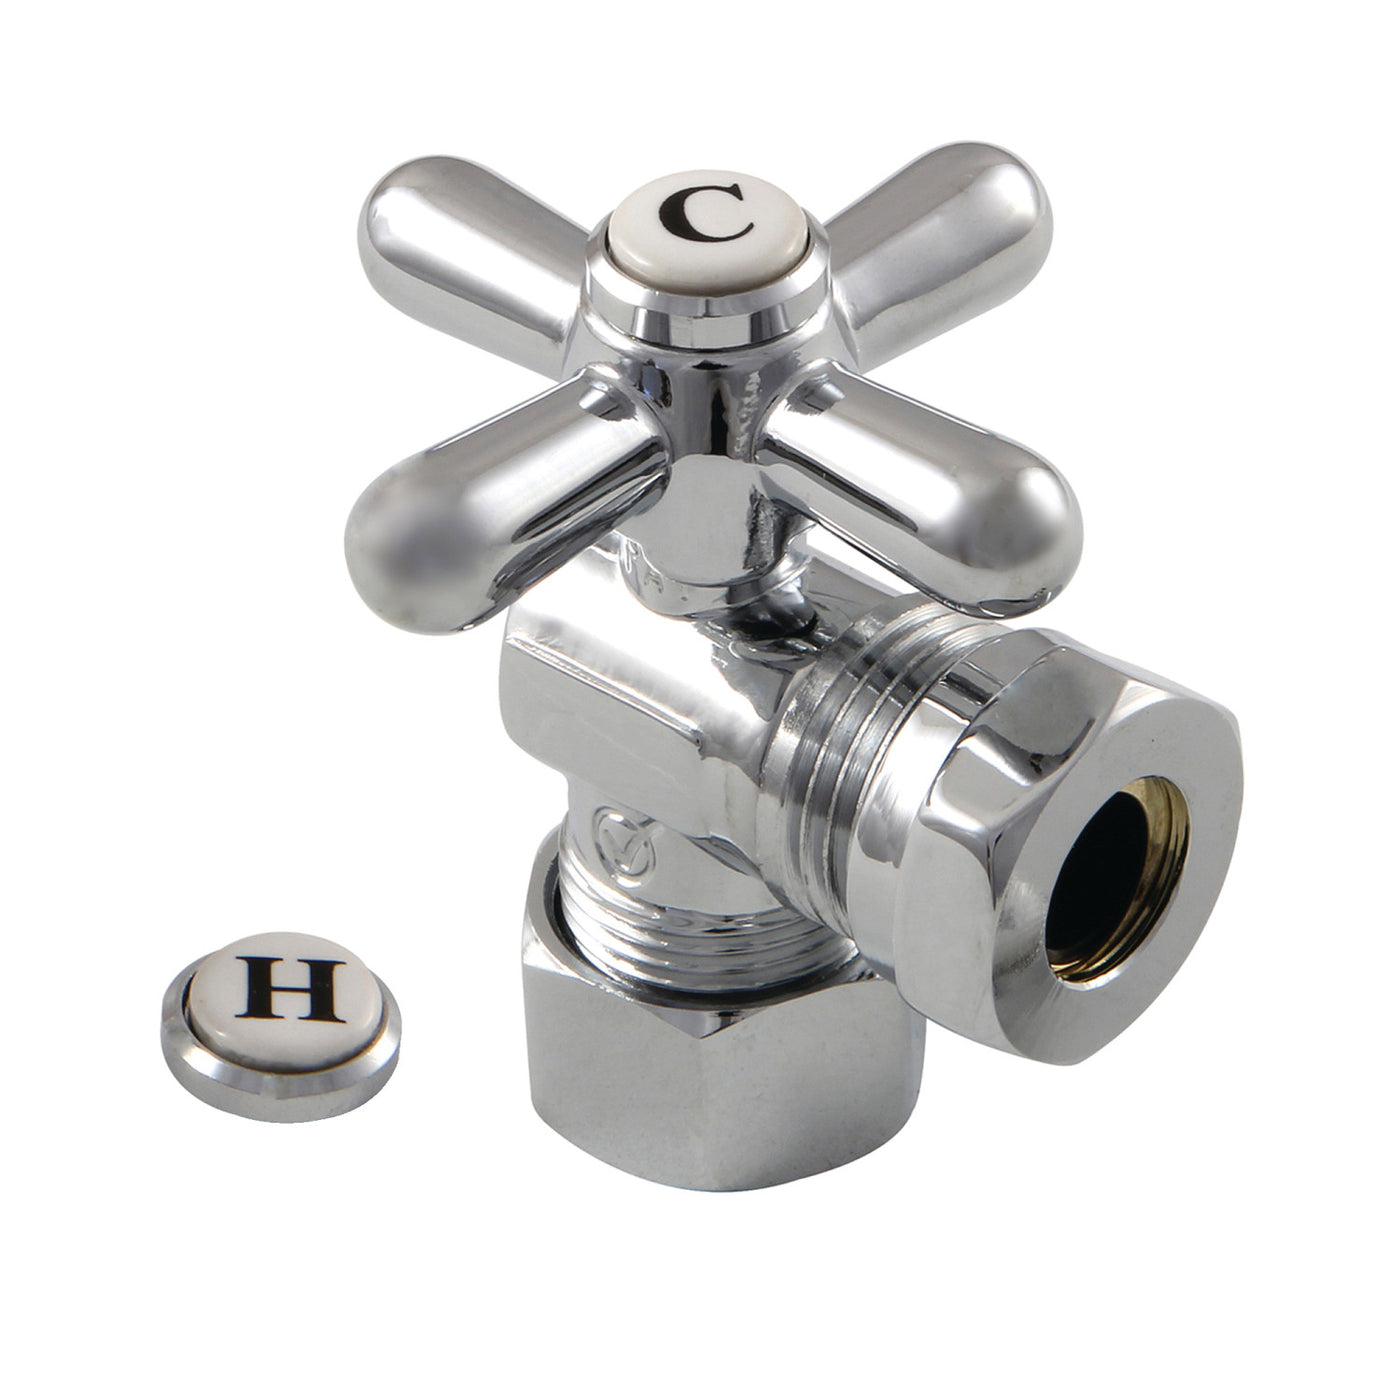 Elements of Design ECC54301X 5/8-Inch OD Comp x 1/2-Inch or 7/16-Inch Slip Joint Angle Stop Valve, Polished Chrome